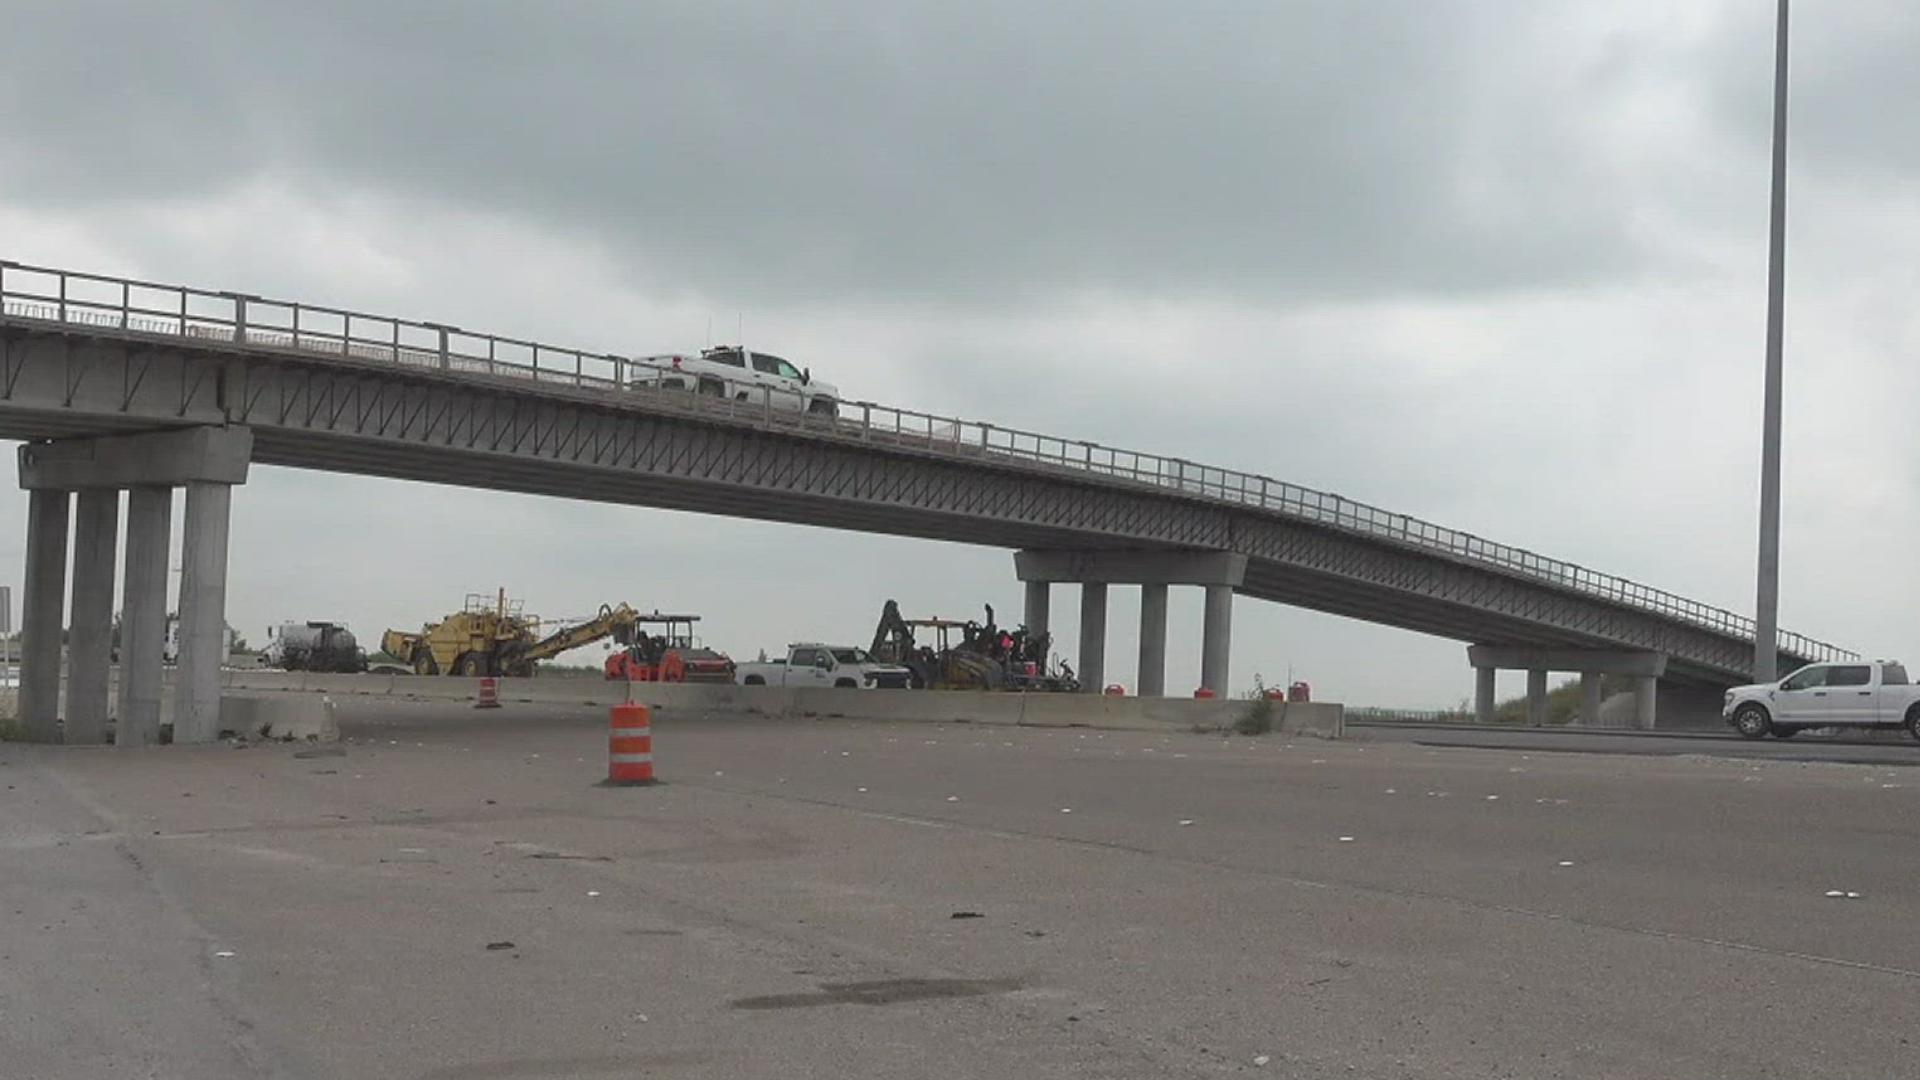 In order to open the new exit, TxDOT will close the southbound right lane of I 37 beginning at exit 17 starting at 9 p.m. Thursday.